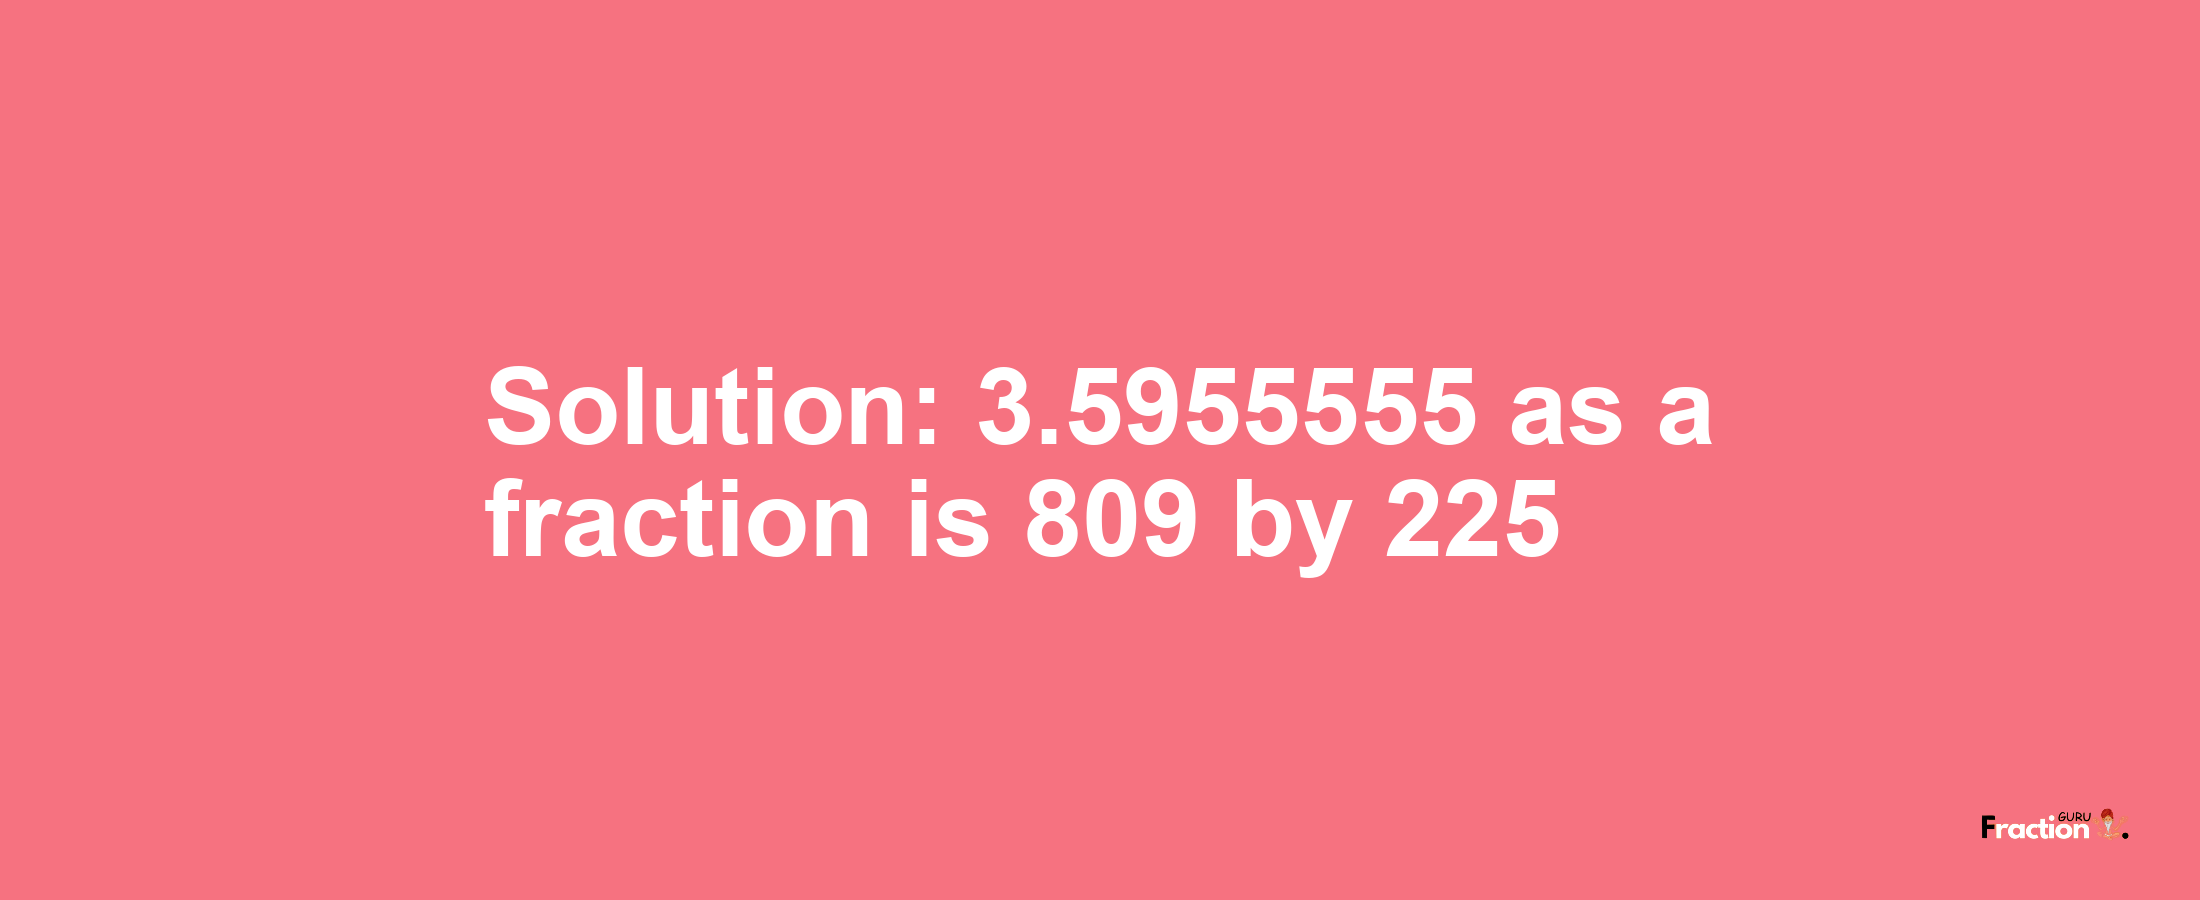 Solution:3.5955555 as a fraction is 809/225